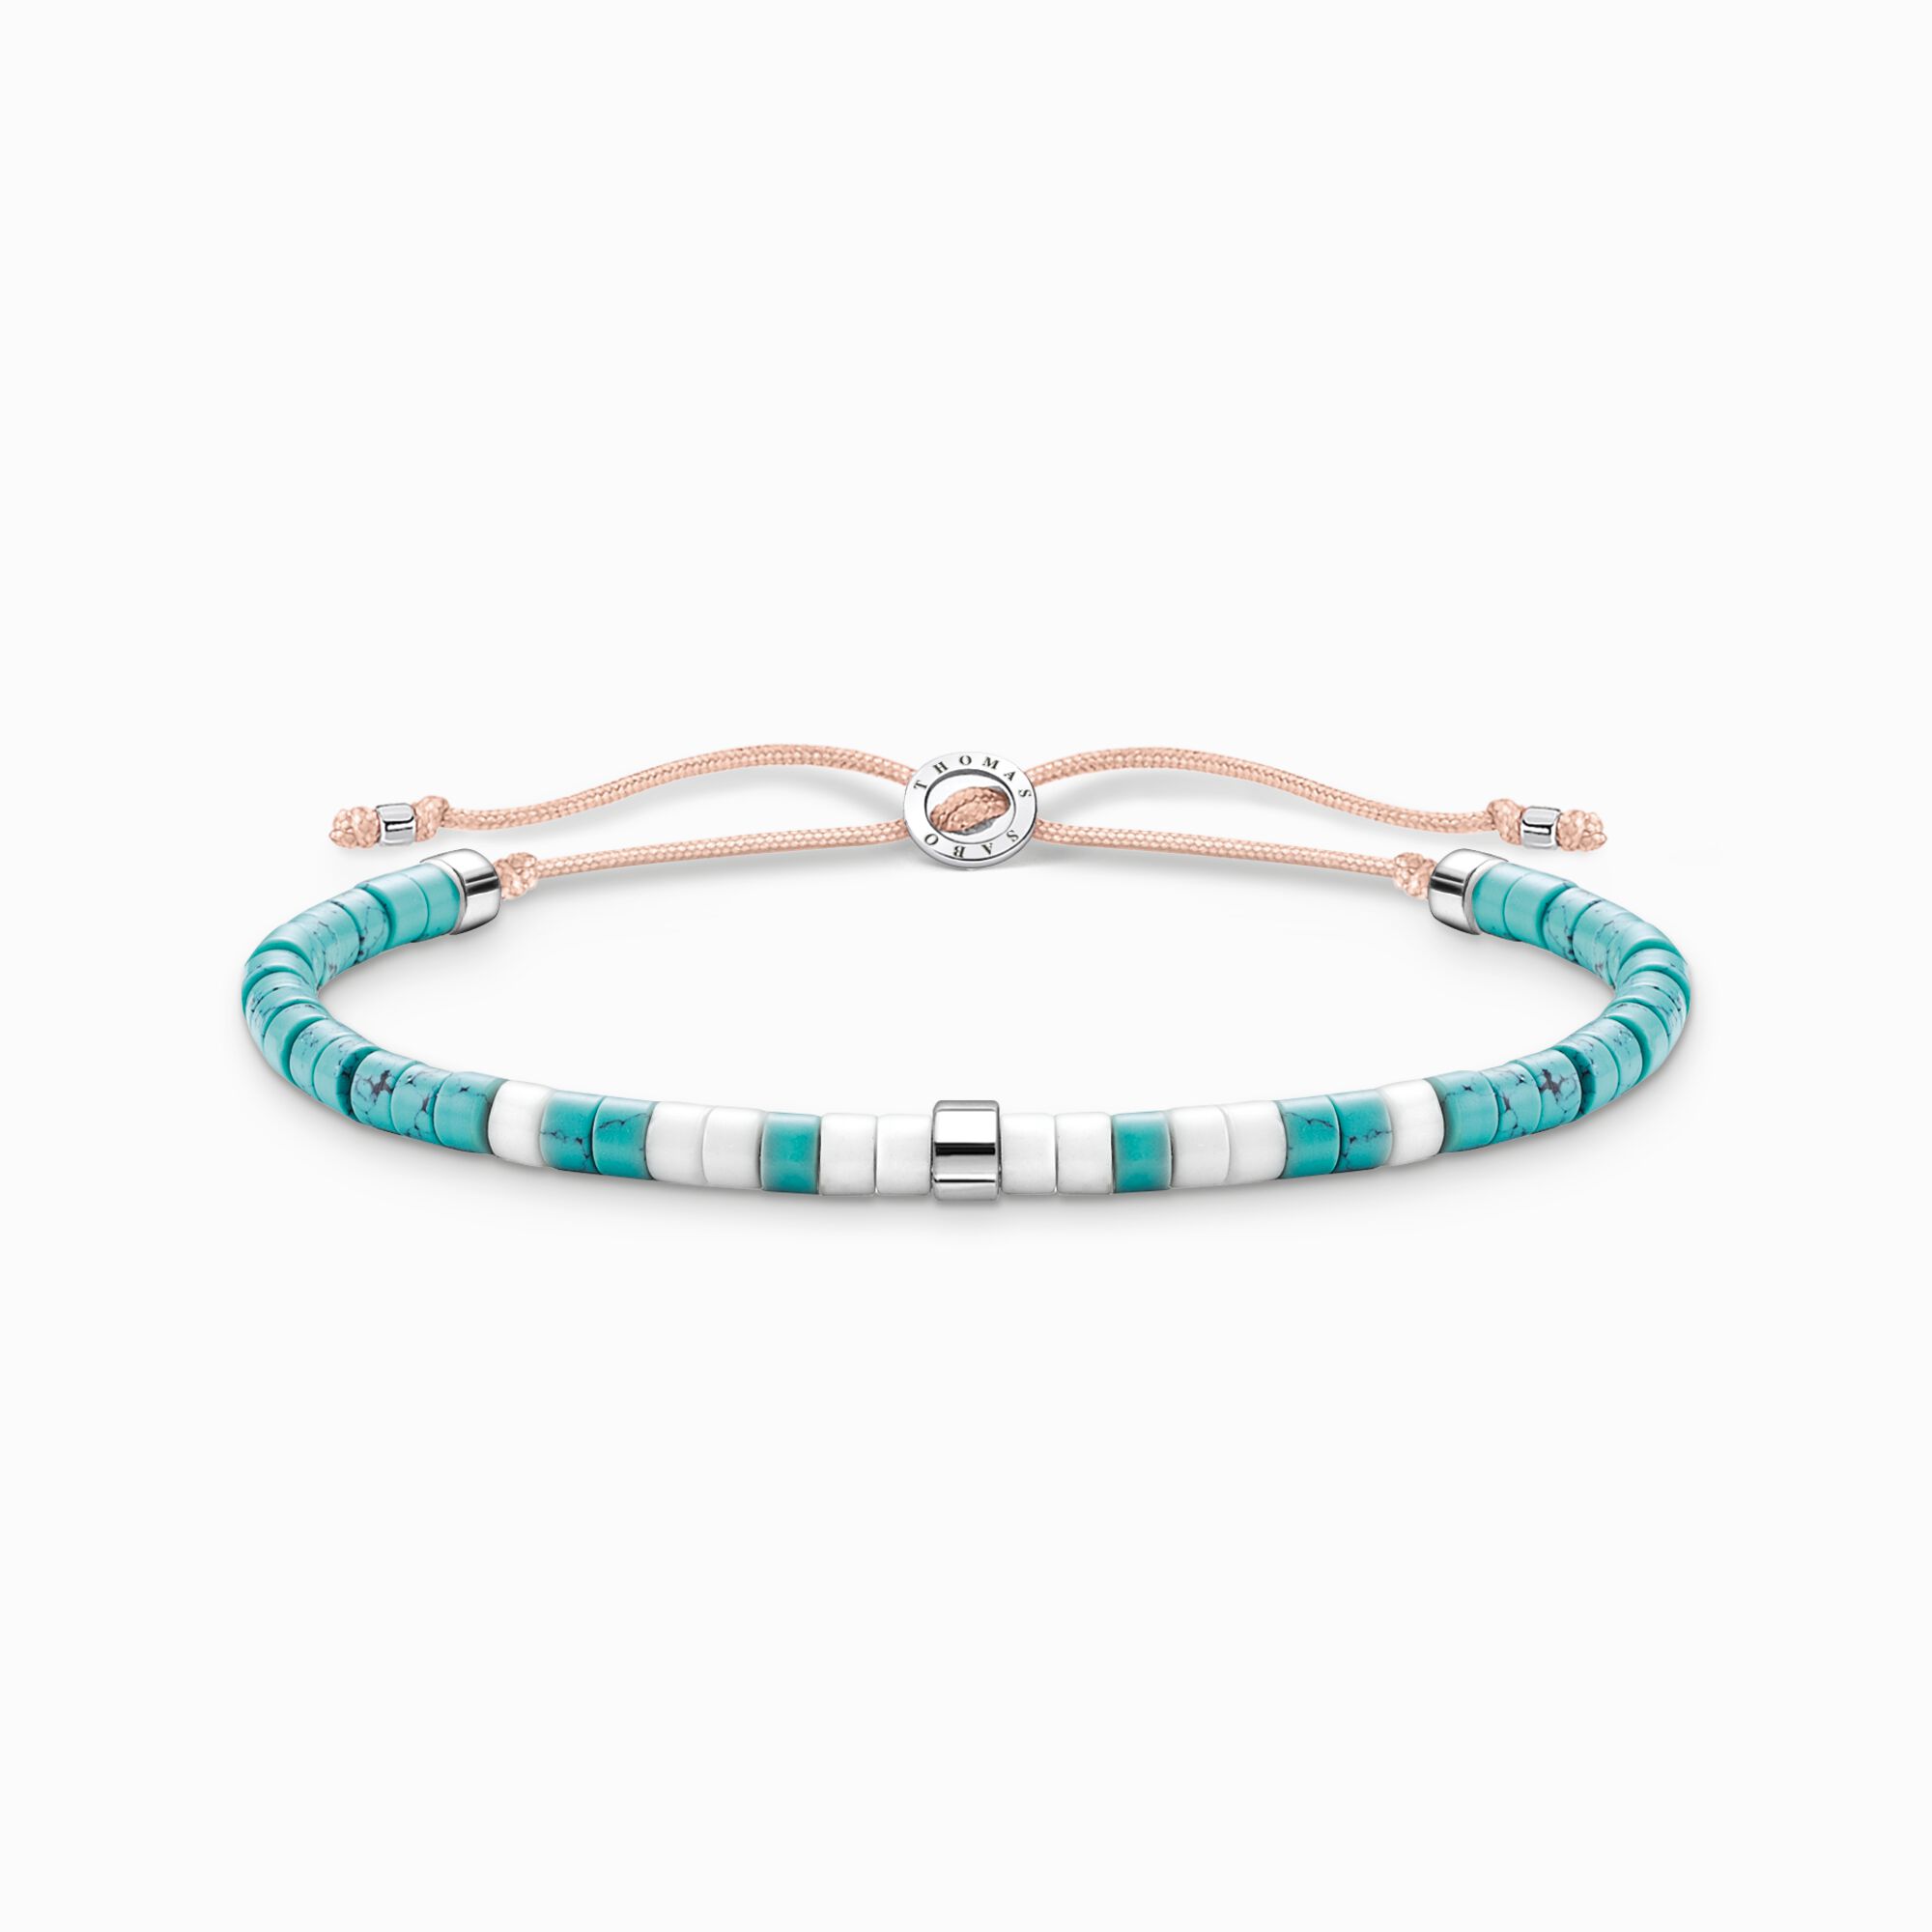 Bracelet with turquoise stones from the Charming Collection collection in the THOMAS SABO online store